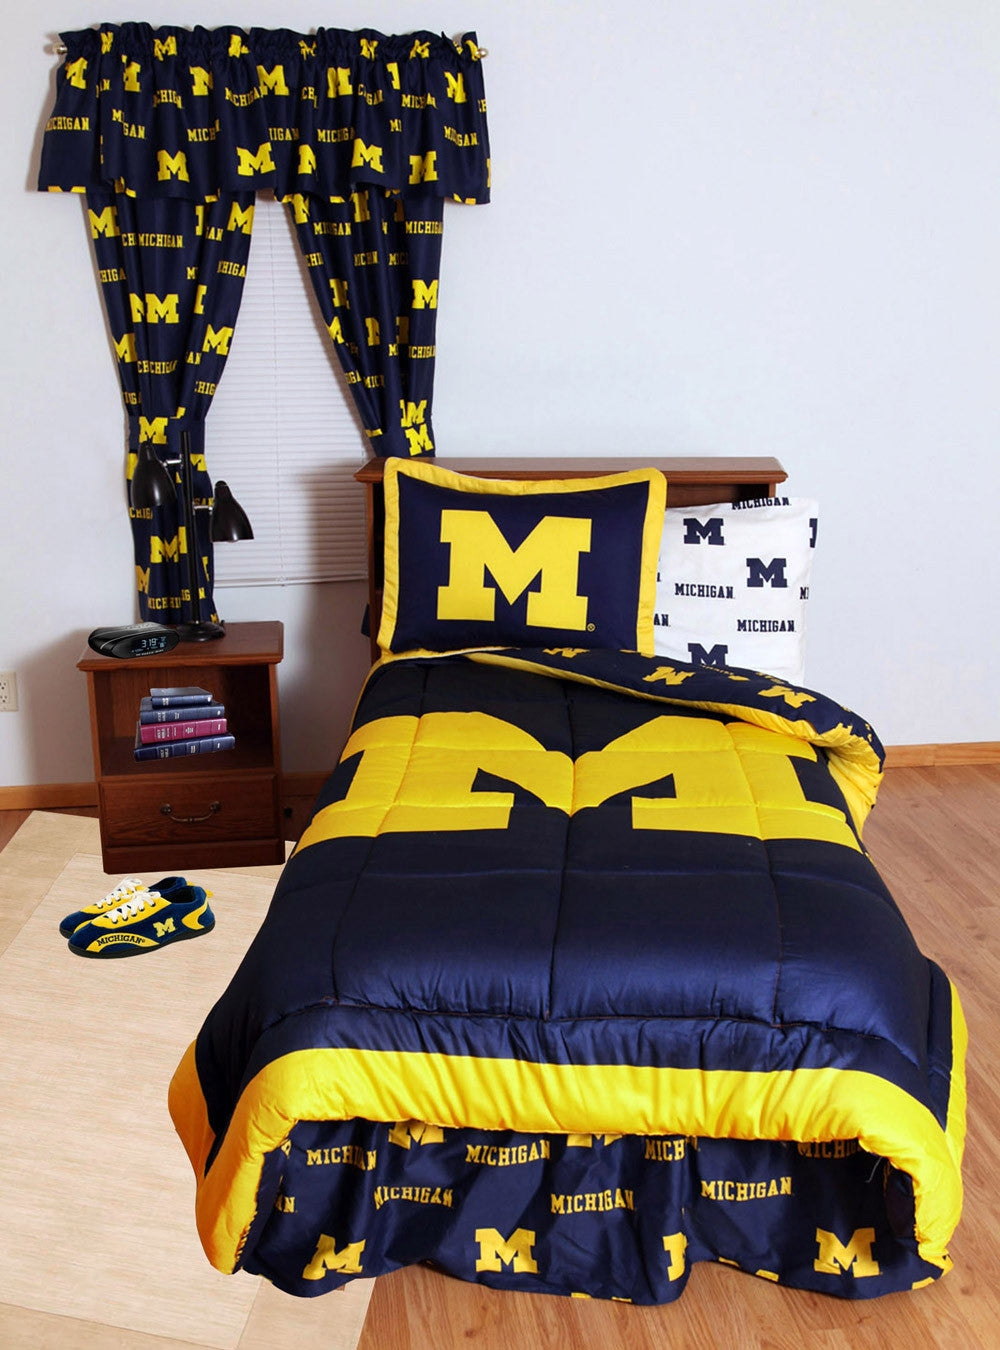 Michigan Bed In A Bag King - With White Sheets - Micbbkgw By College Covers